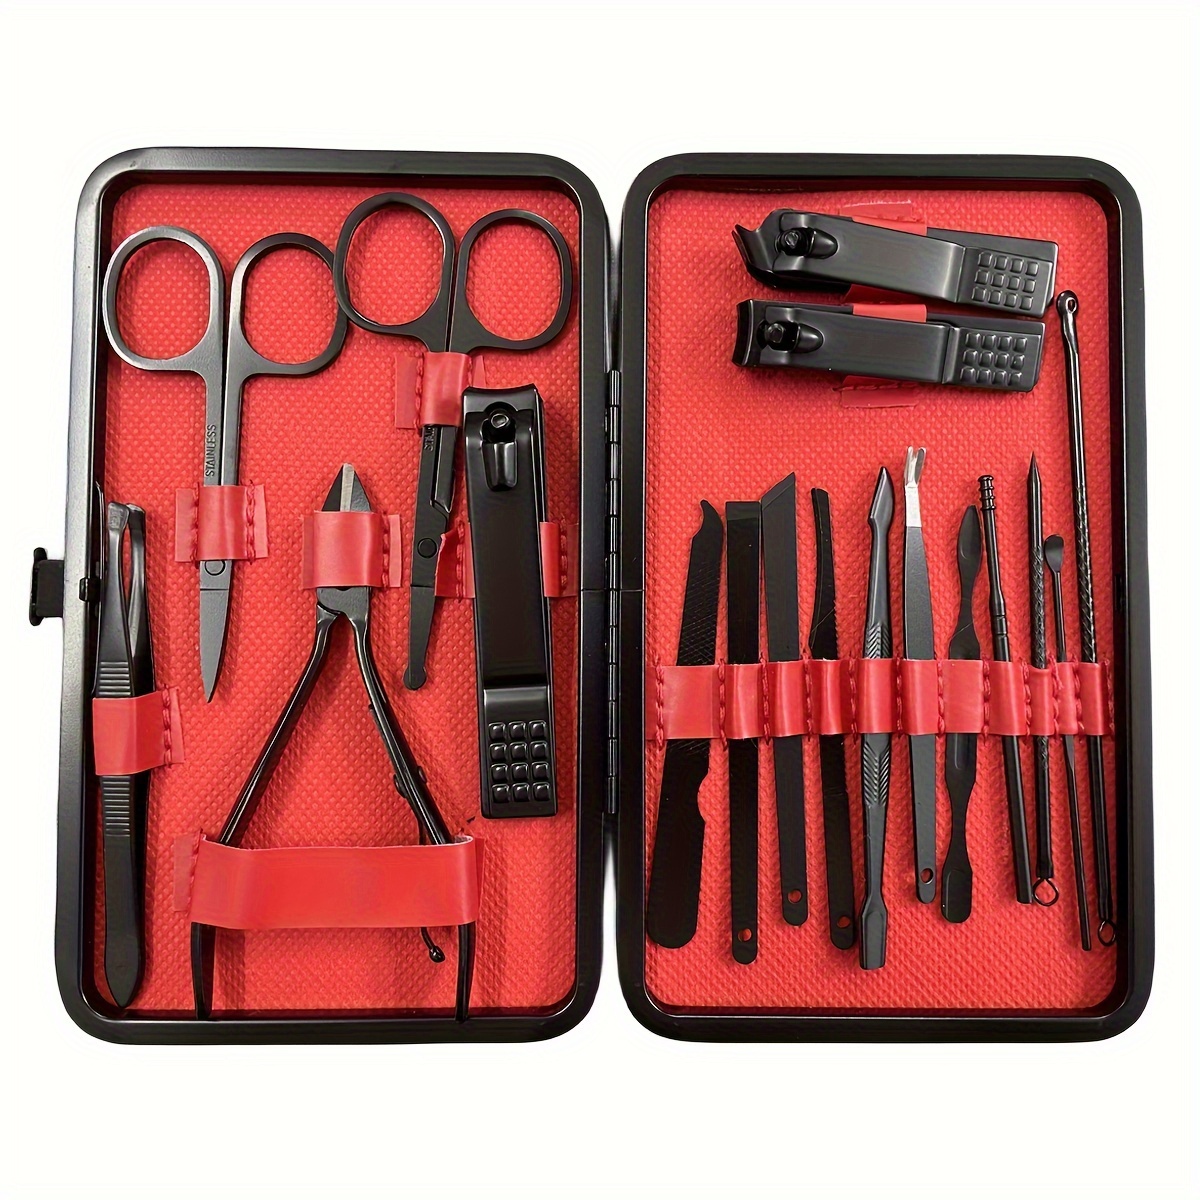 

7/11/18 Pcs Professional Manicure And Pedicure Kit - Includes Stainless Steel Cuticle Nipper, Nail Clippers, Scissors, And Nail Polish Tools - Perfect For Home Grooming And Salon Use